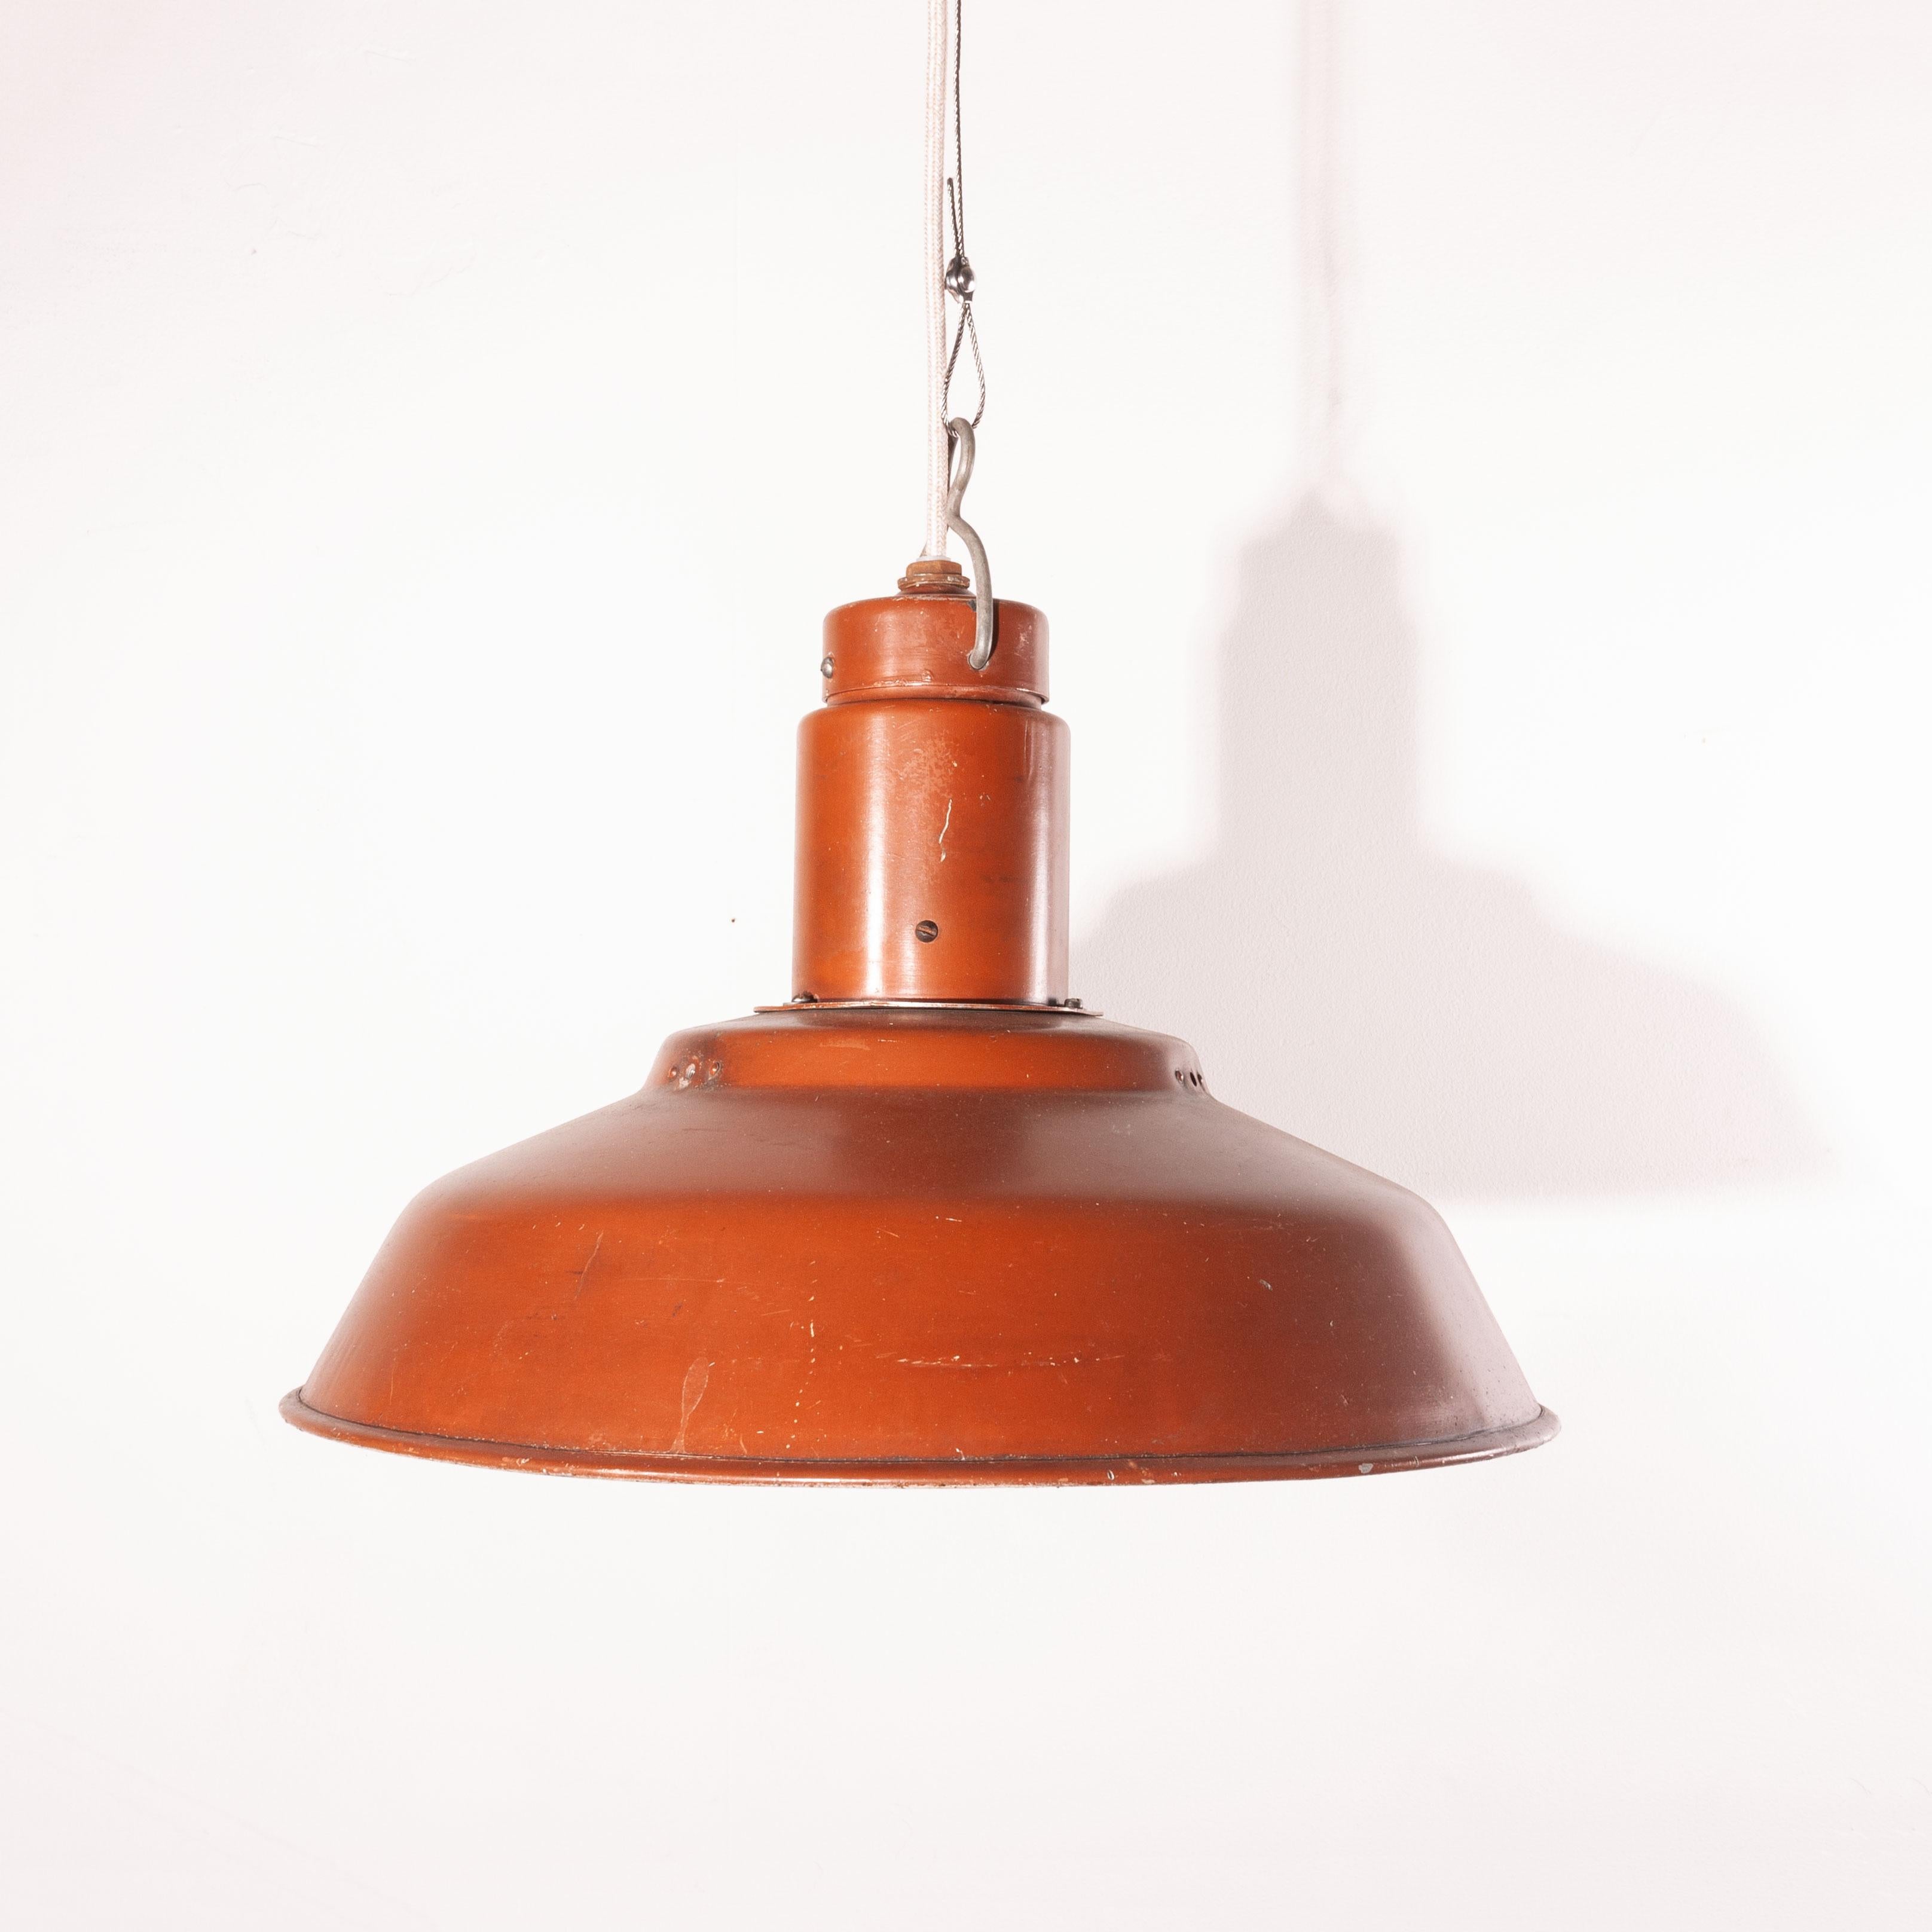 1960s industrial weathered burnt red ceiling pendant lamp/light shades, burnt red
1960s vintage industrial weathered burnt red ceiling pendant lamp/light shades. We have five of these stunning ex Soviet lamps available. Made from spun aluminium